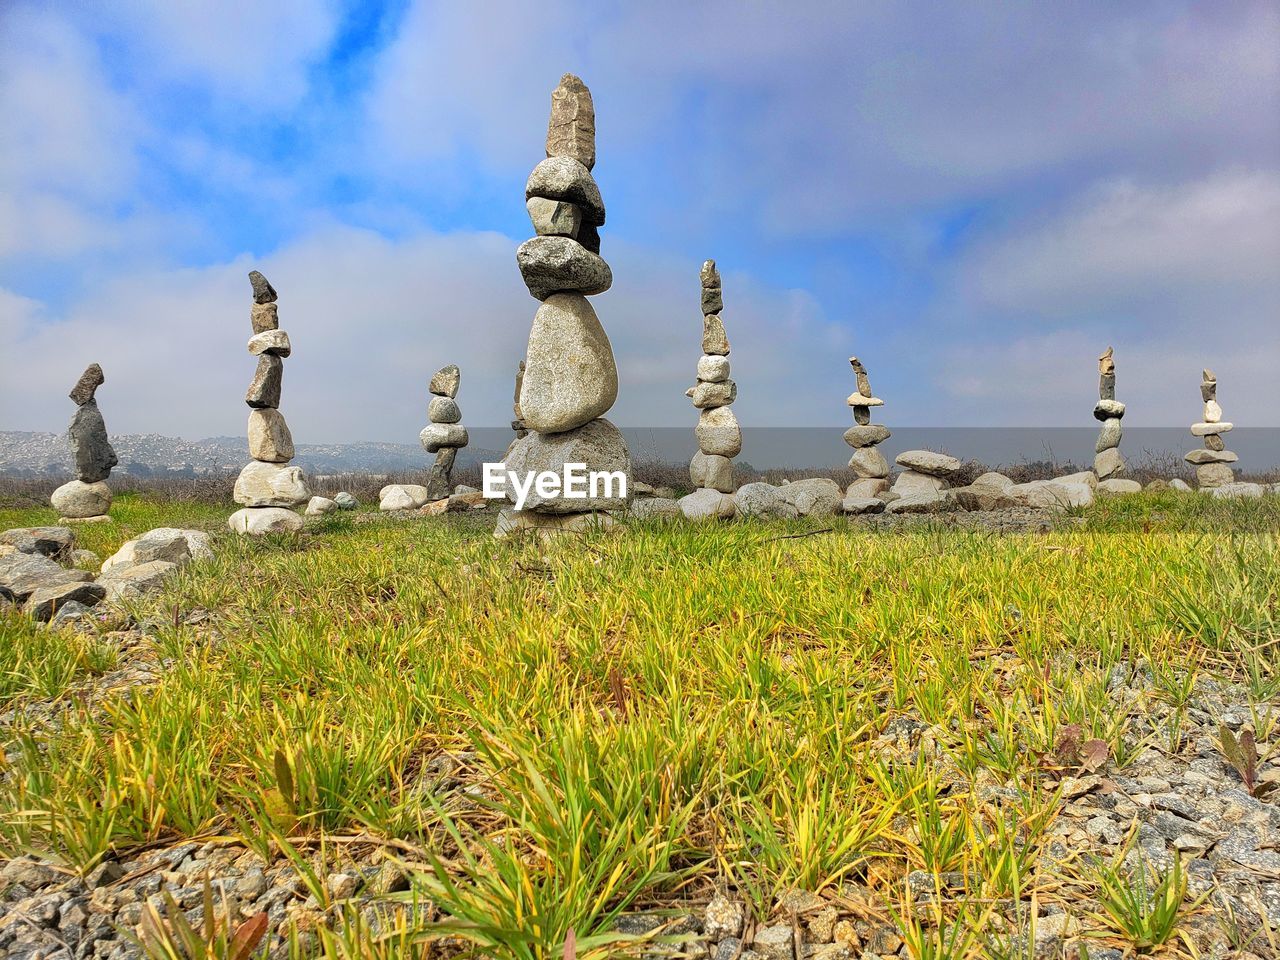 Rock balance on a green grass field with a blue and grey clouds 